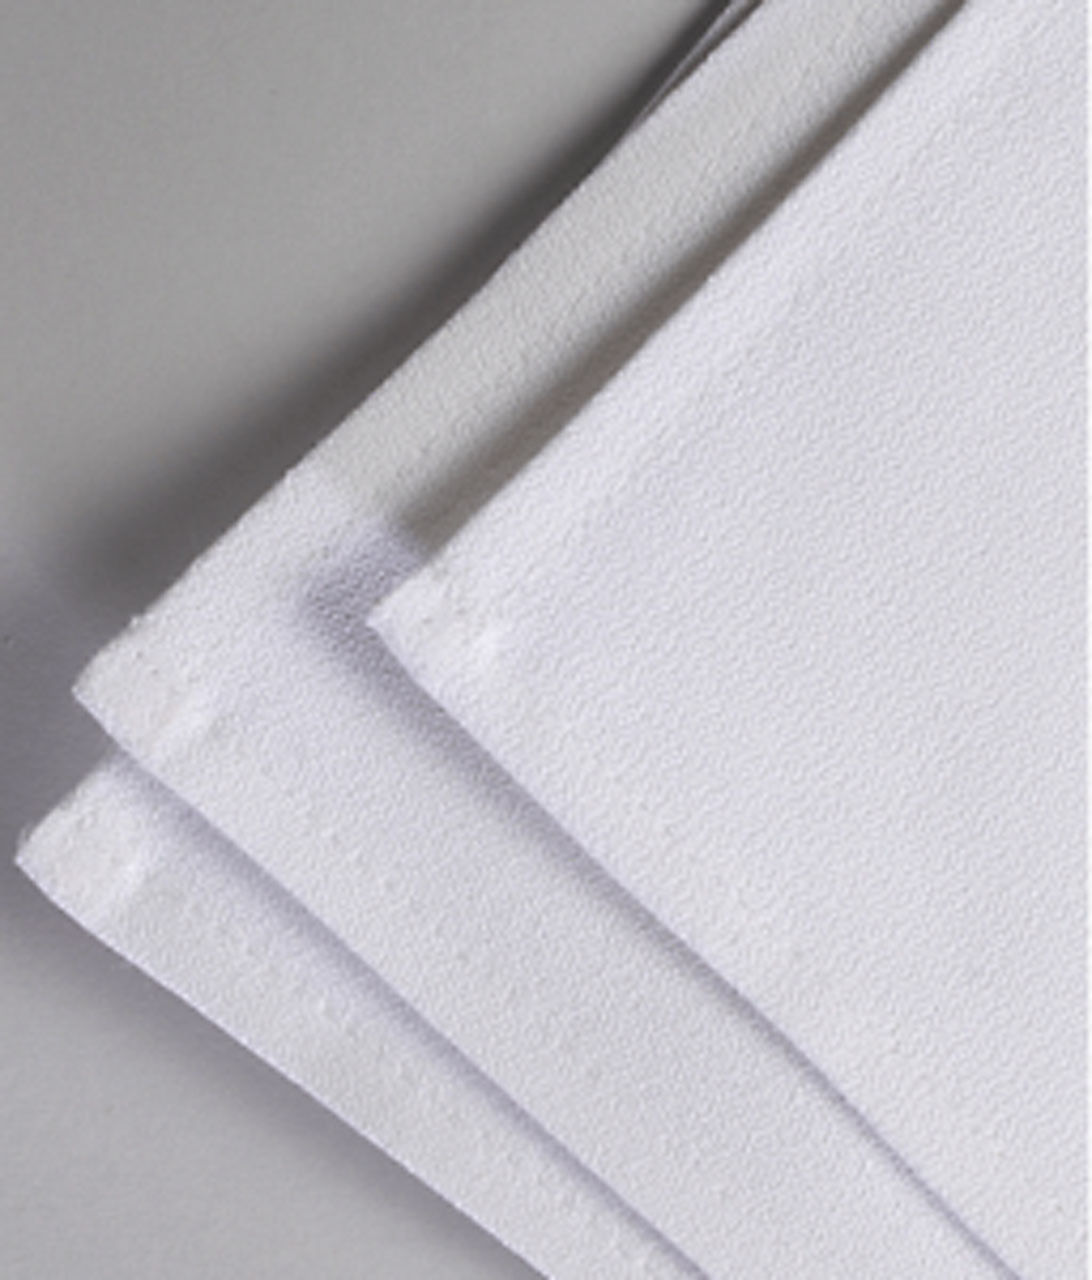 What options are available for the 100% Cotton Momie Square Table Linens?